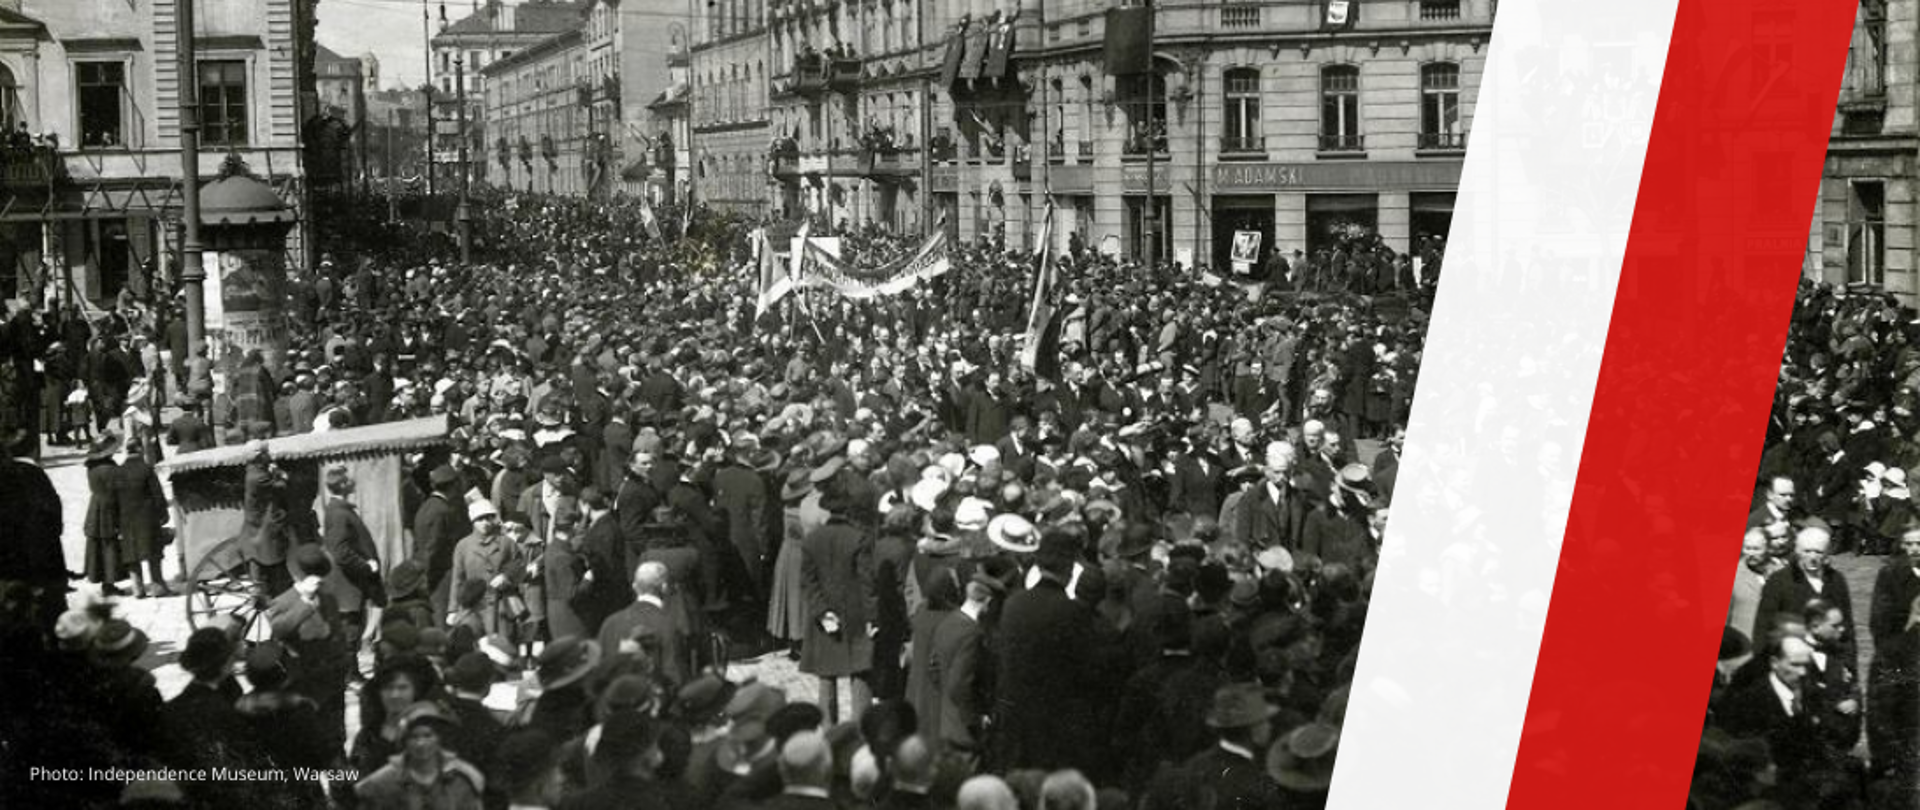 On 11 November 1918, 102 years ago, Poland regained its independence.